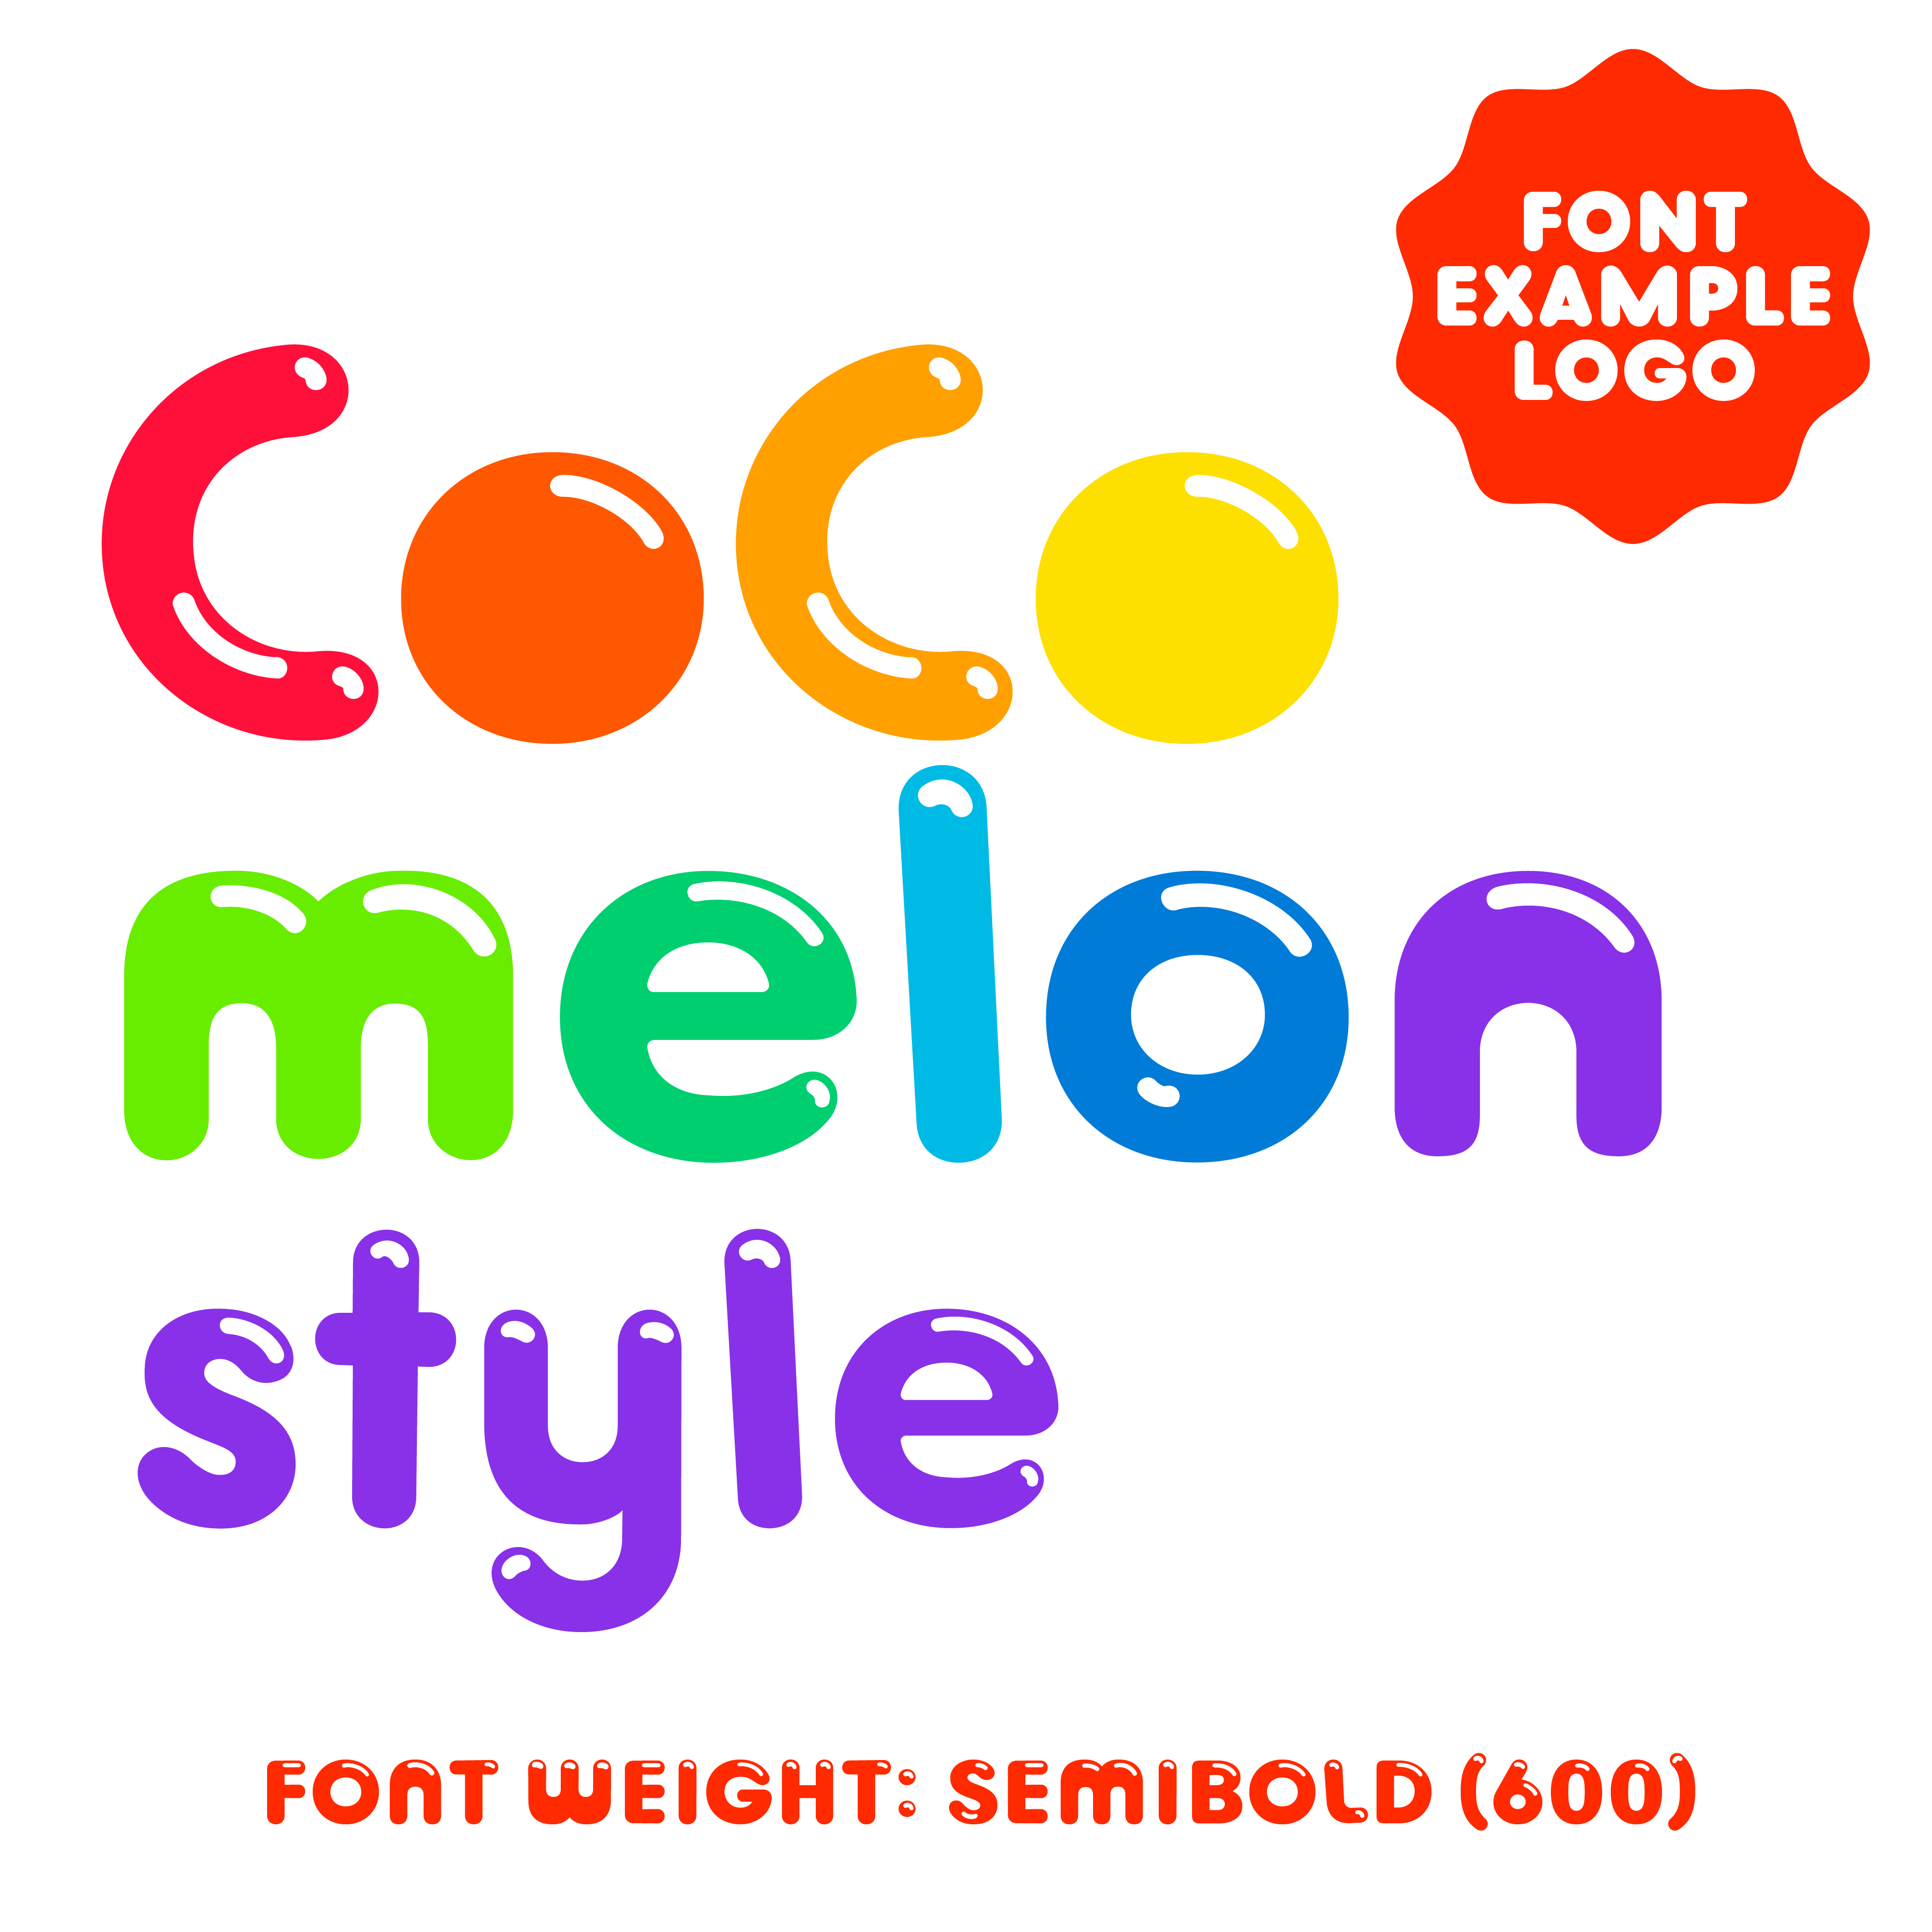 SemiBold (600) font weight for Cocomelon-style logo